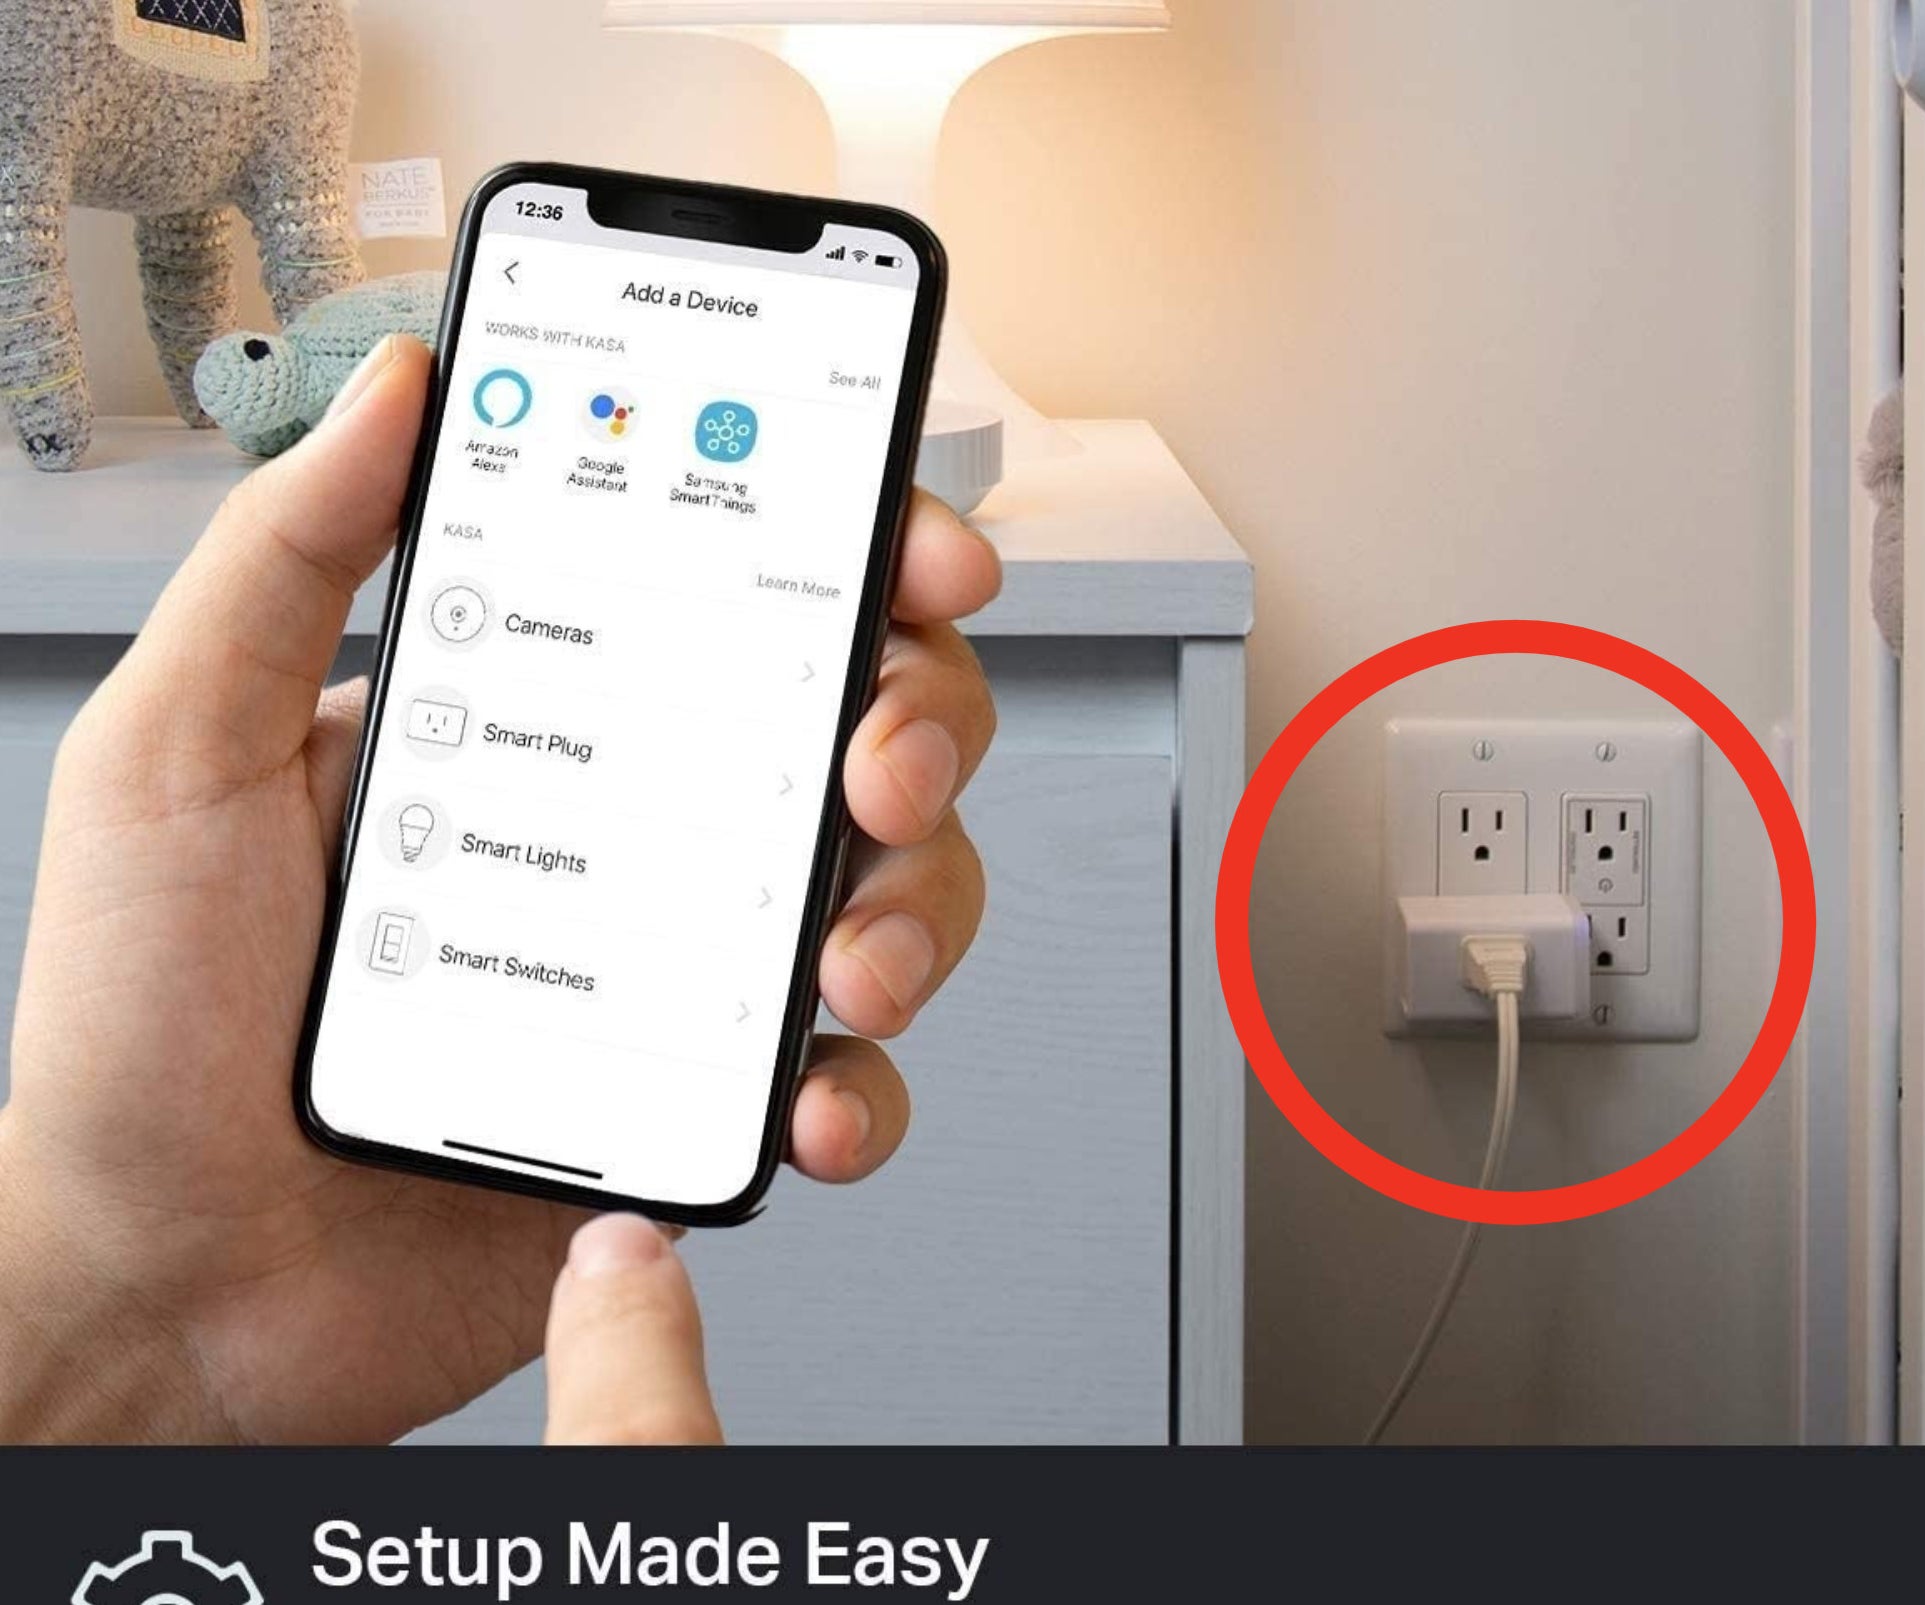 a person holding a phone, controlling the smart plug plugged into the wall outlet